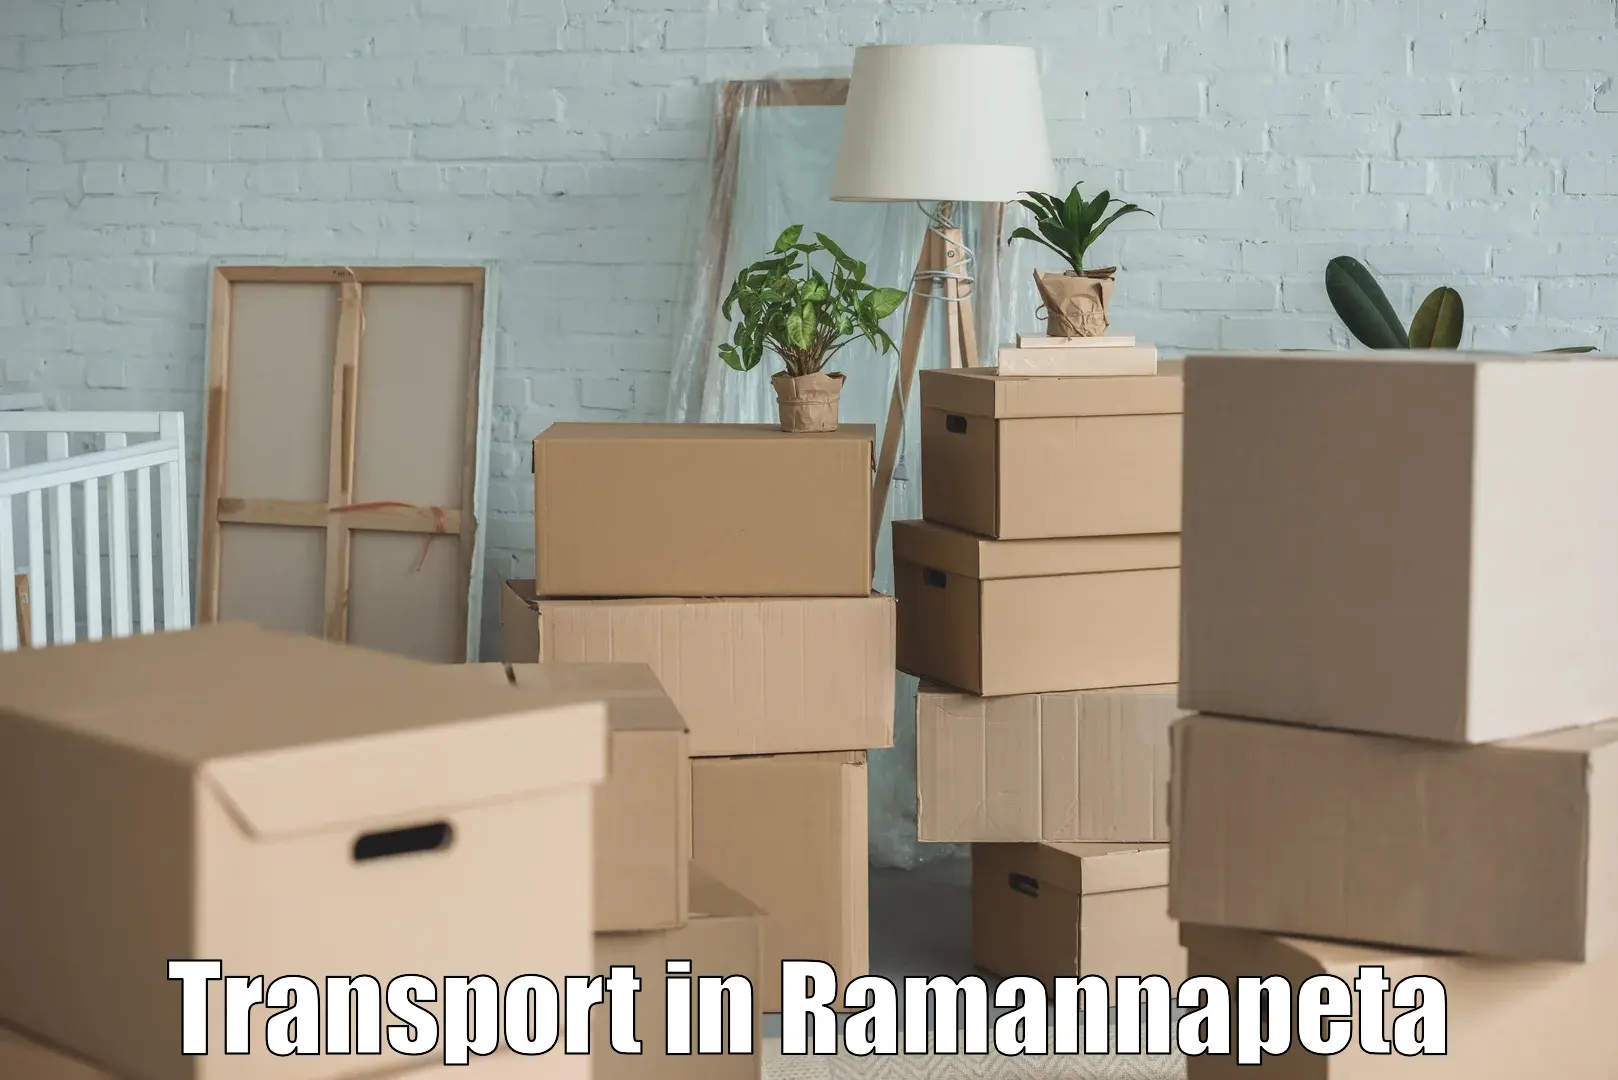 Daily parcel service transport in Ramannapeta